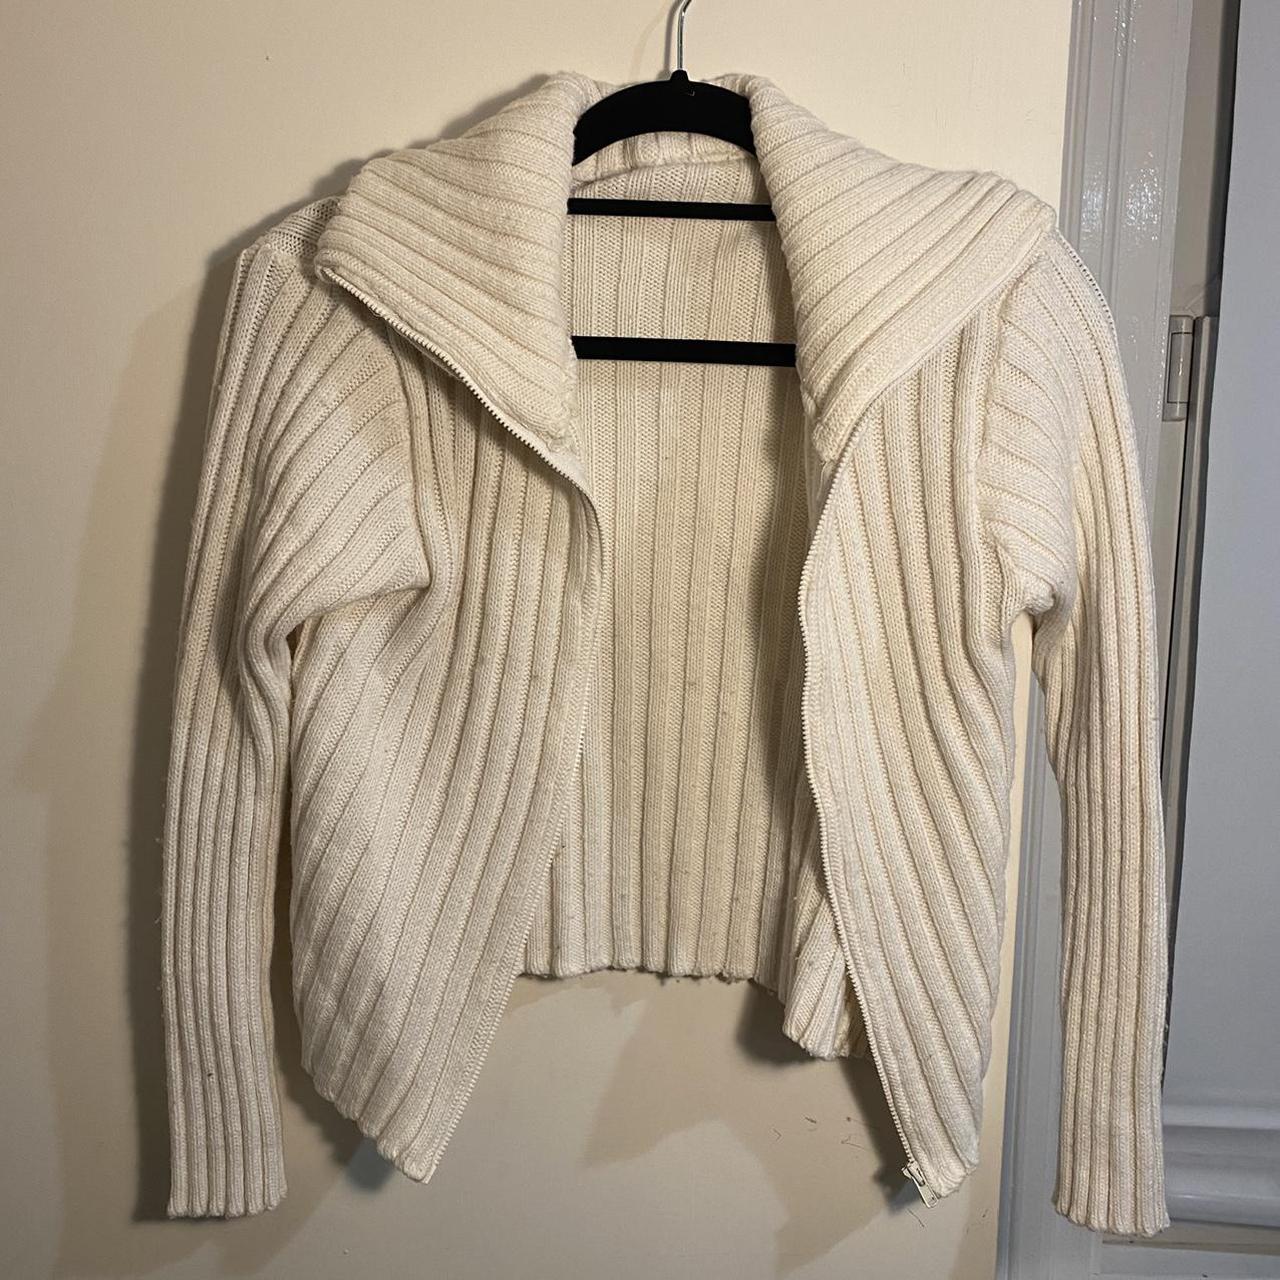 Selling this white zip up knitted jumper bought on... - Depop